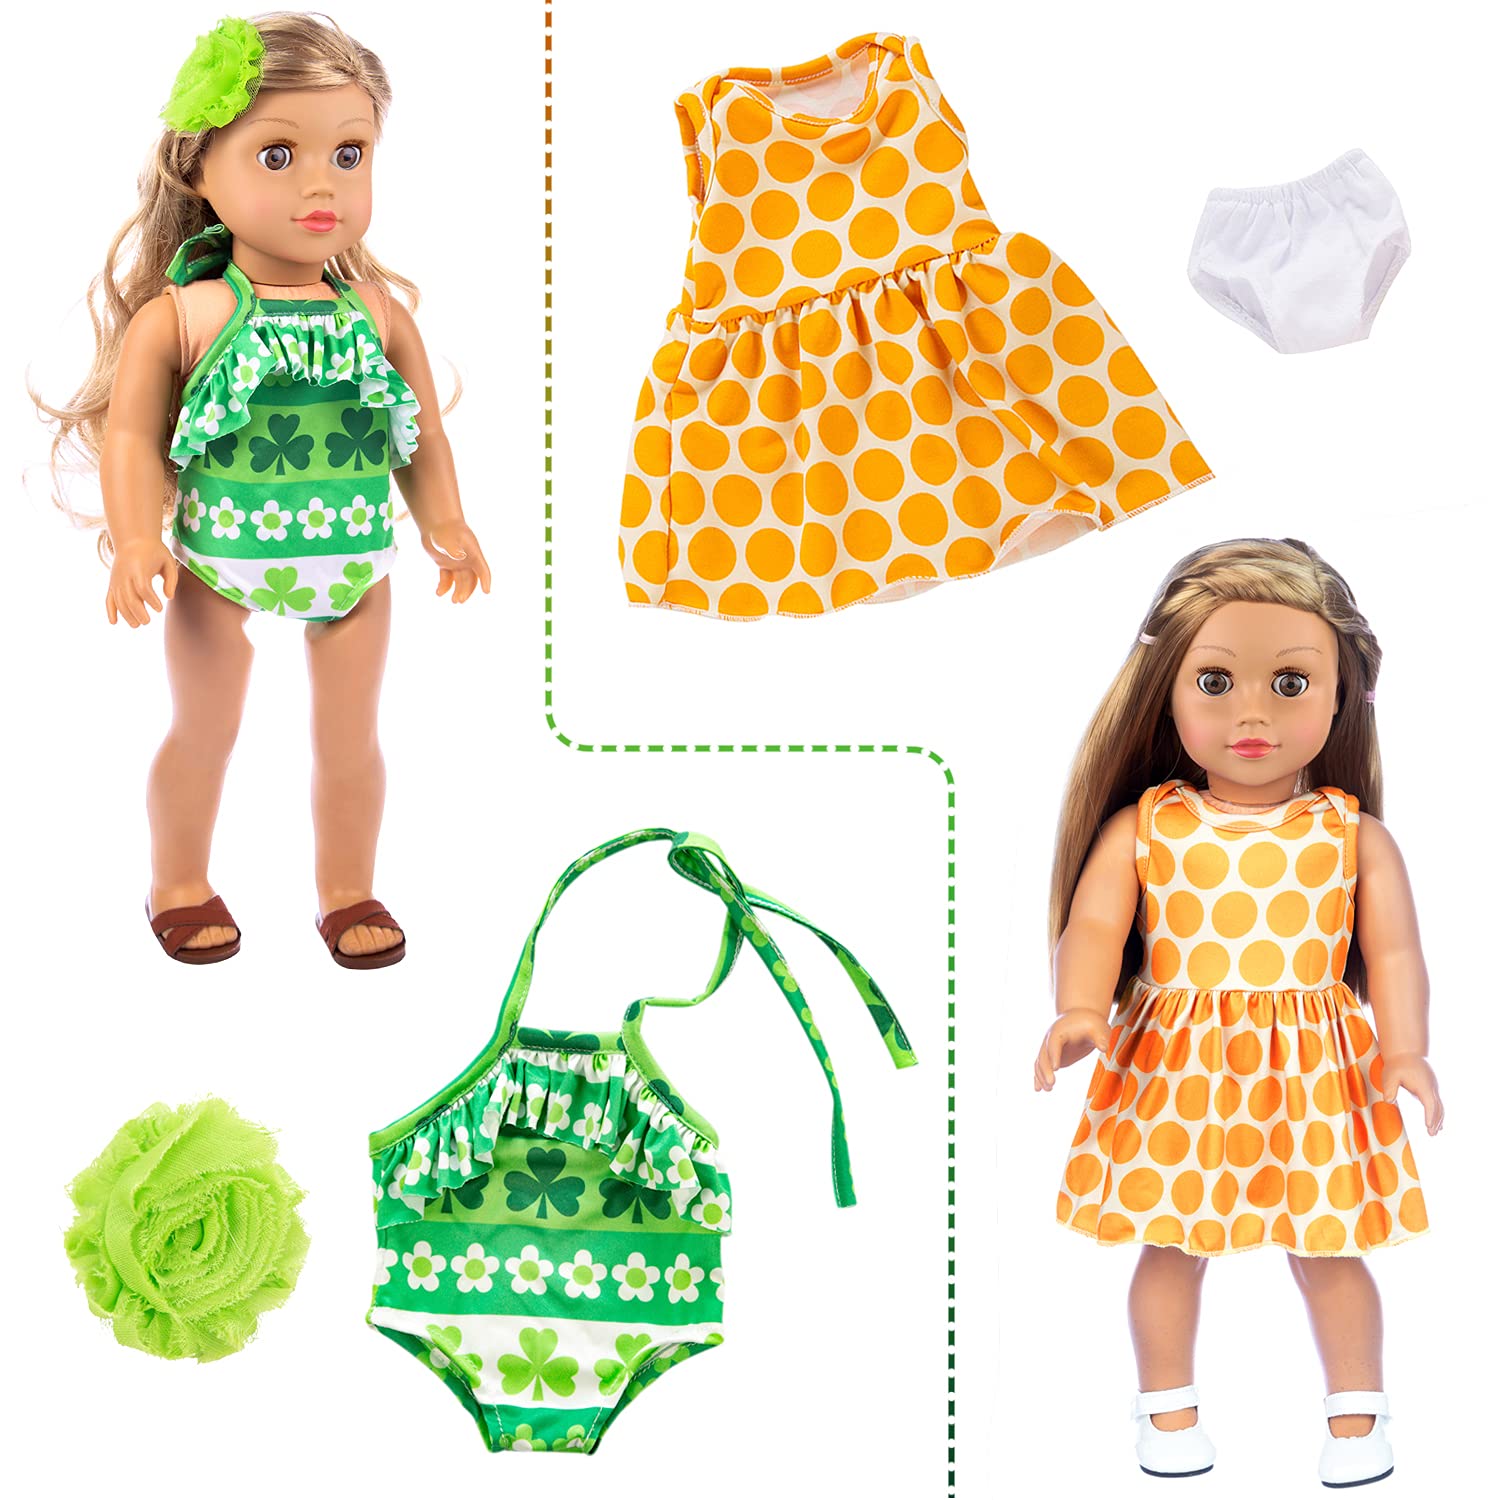 ZITA ELEMENT 24 Pcs American 18 Inch Girl Doll Clothes Dress and Accessories - Including 10 Complete Set of Clothing Outfits with Hair Bands, Hair Clips, Crown and Cap